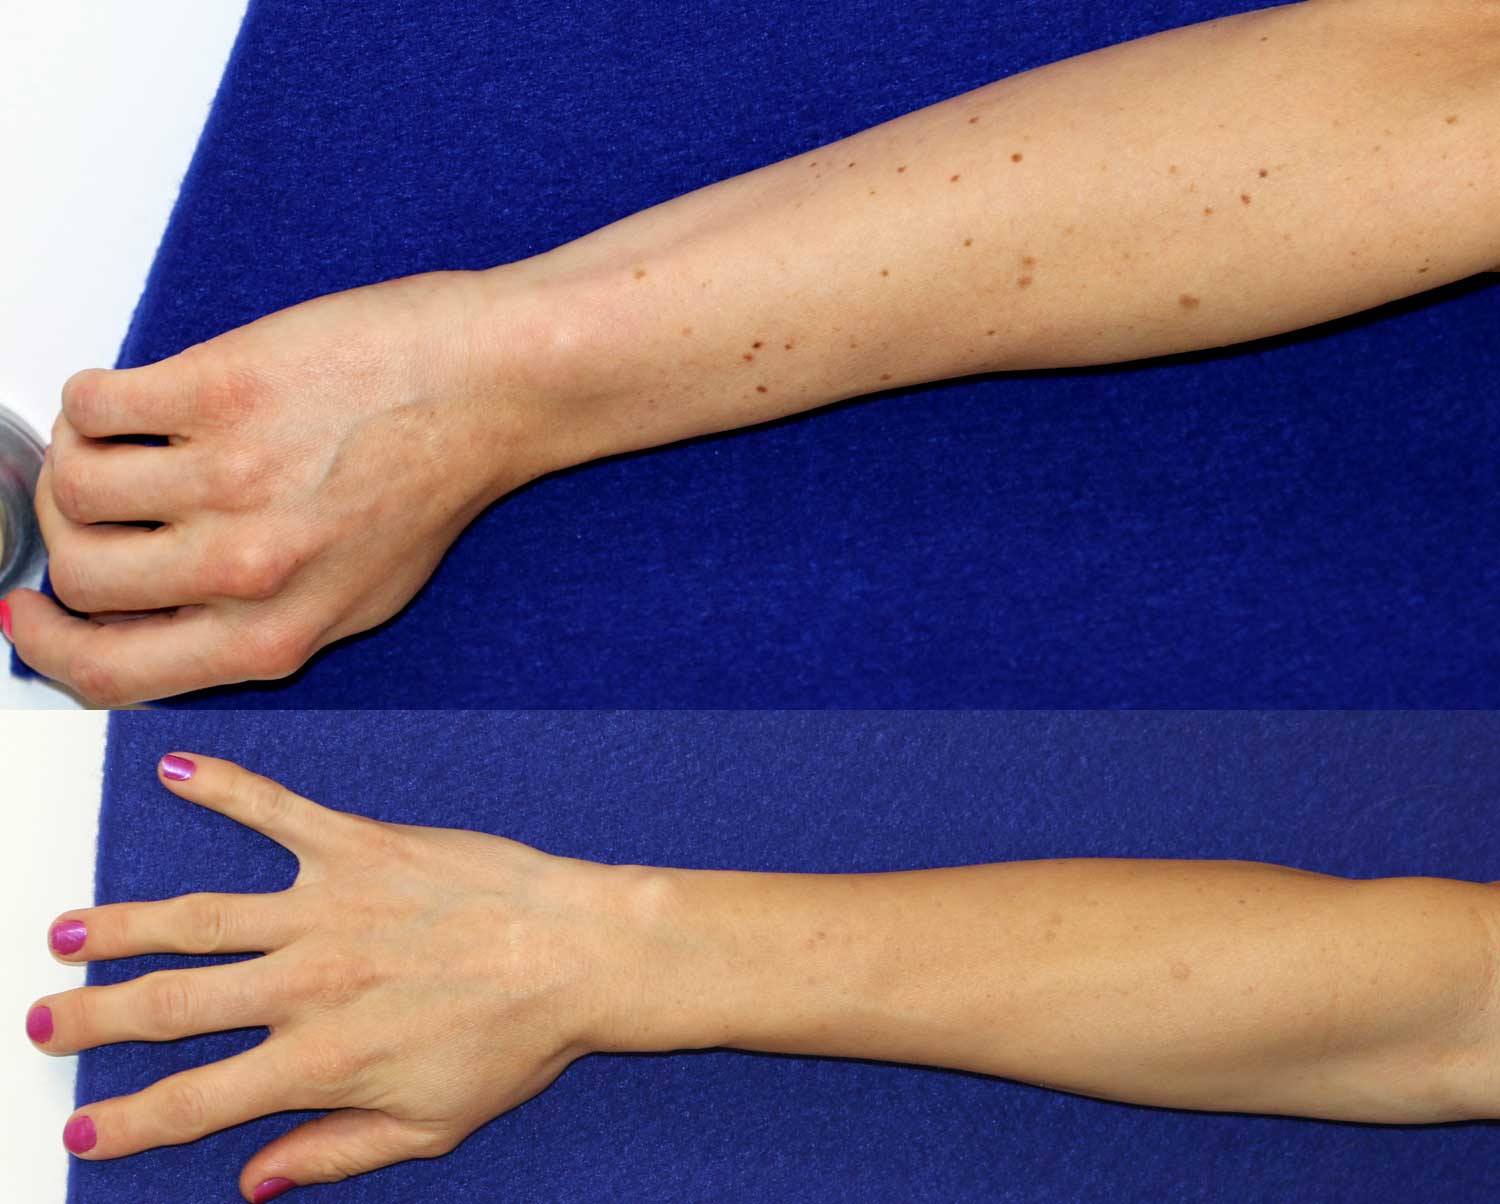 Results of laser treatment to arm and hand spots